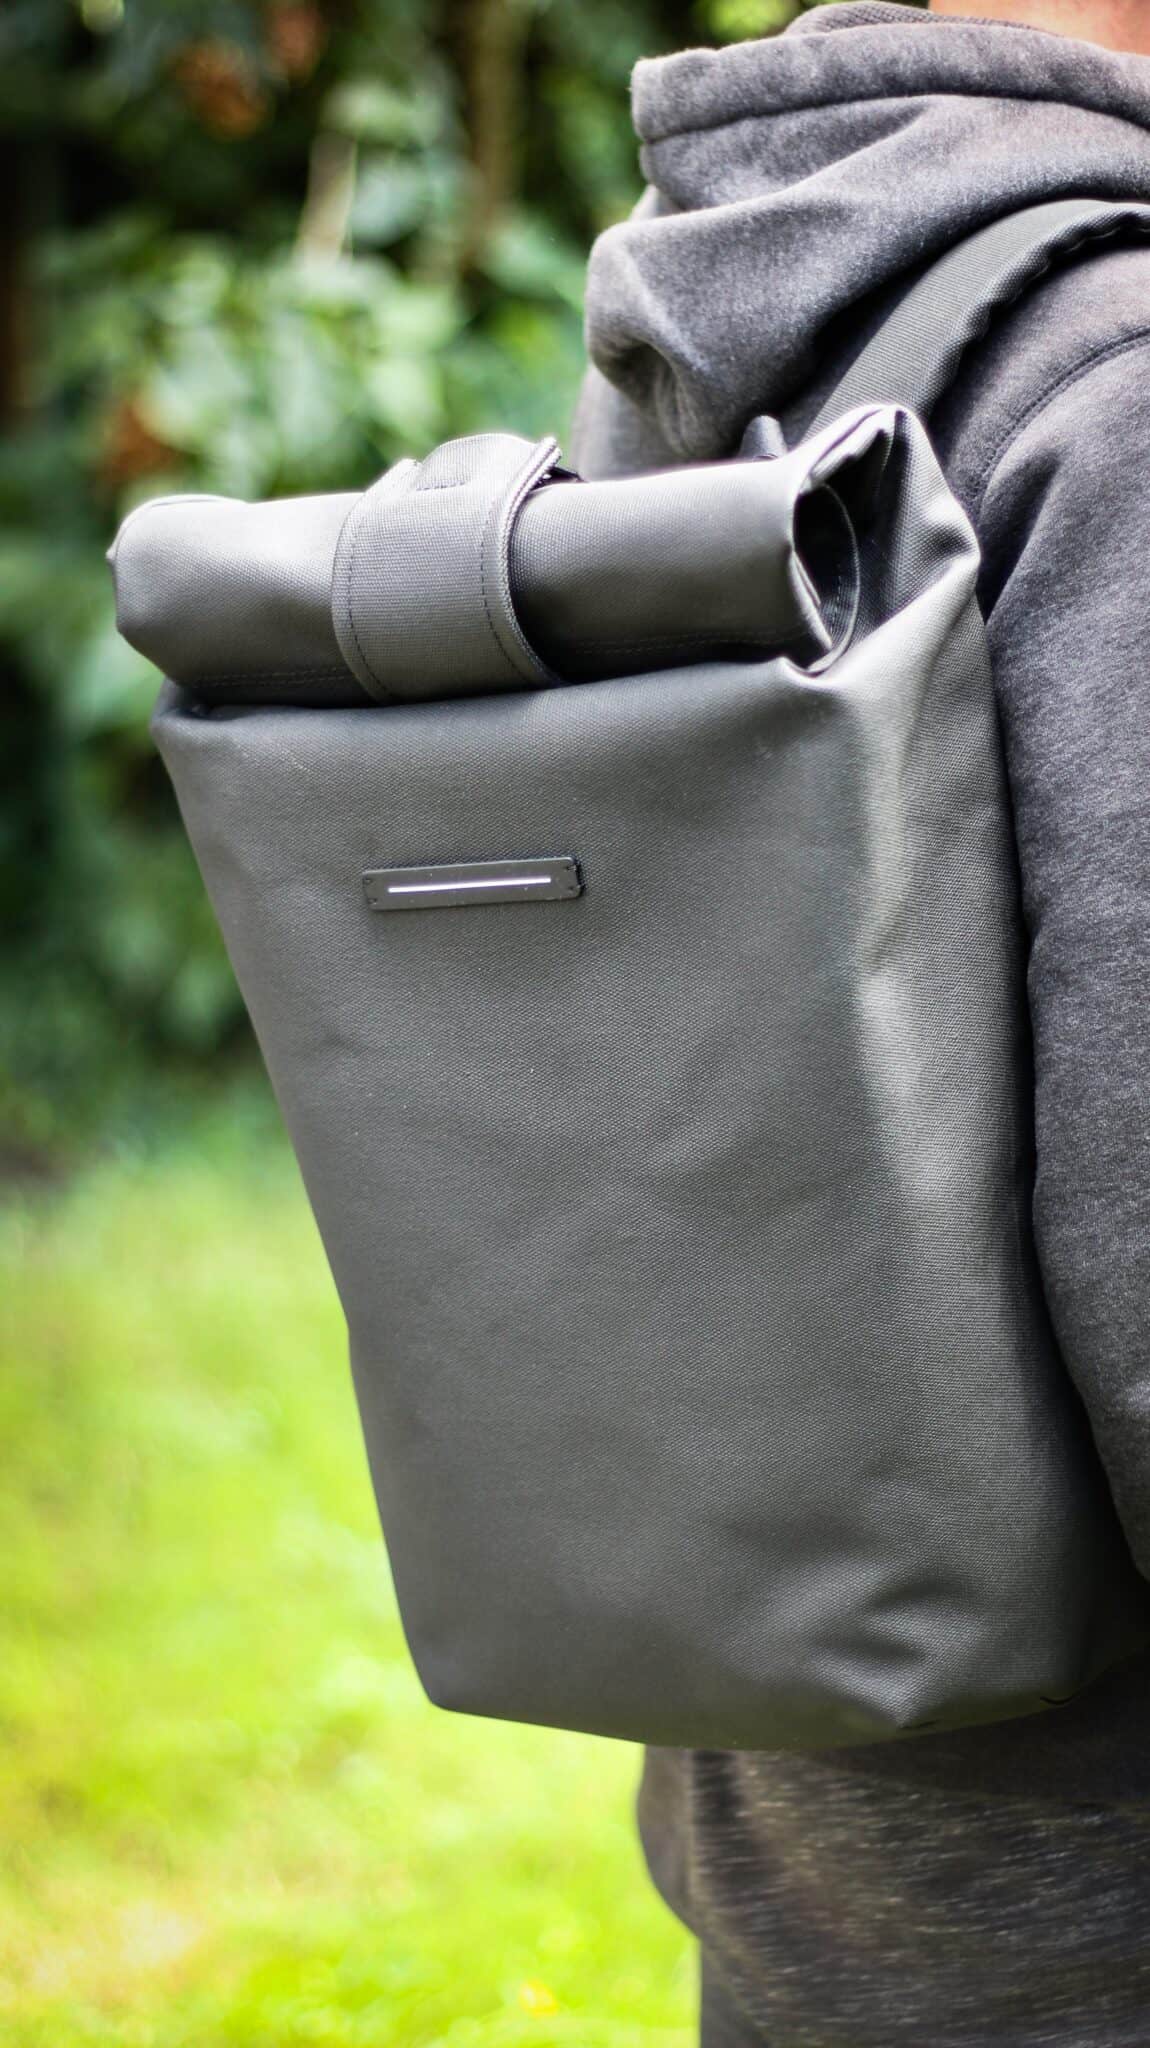 Horizn Studios review: Is this sustainable luggage worth it?